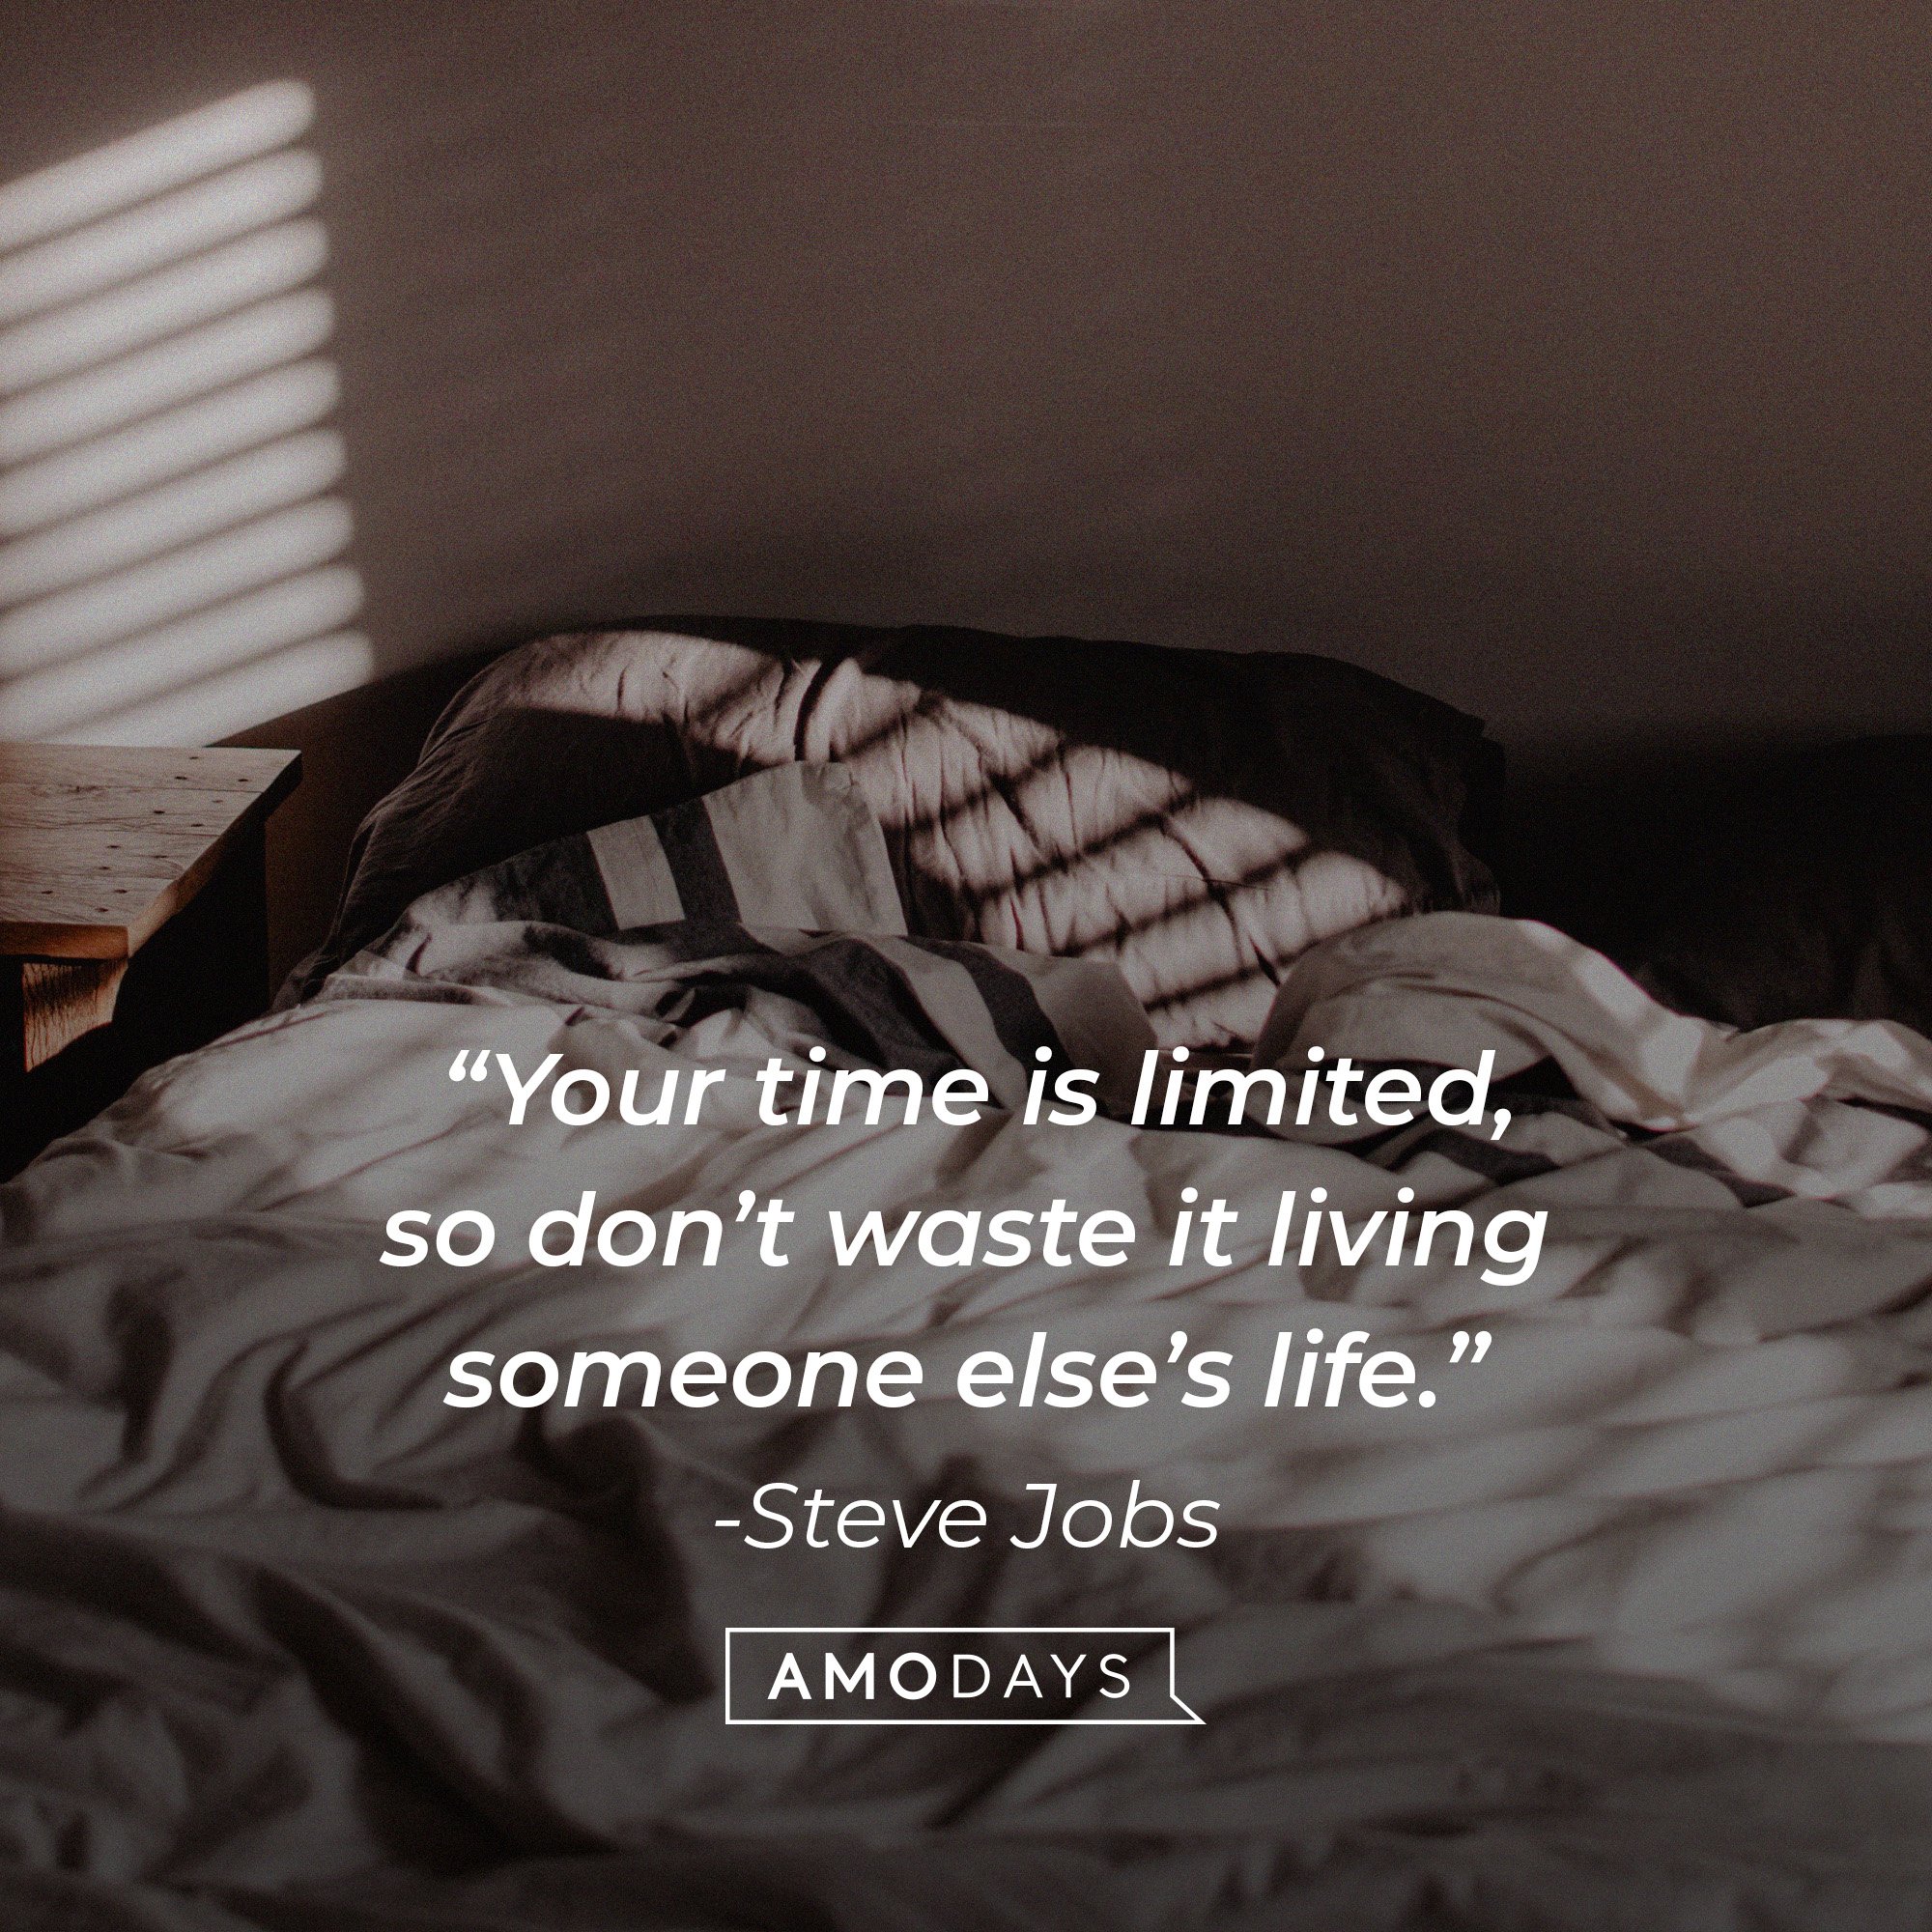 Steve Jobs's quote: “Your time is limited, so don’t waste it living someone else’s life.” | Image: AmoDays 